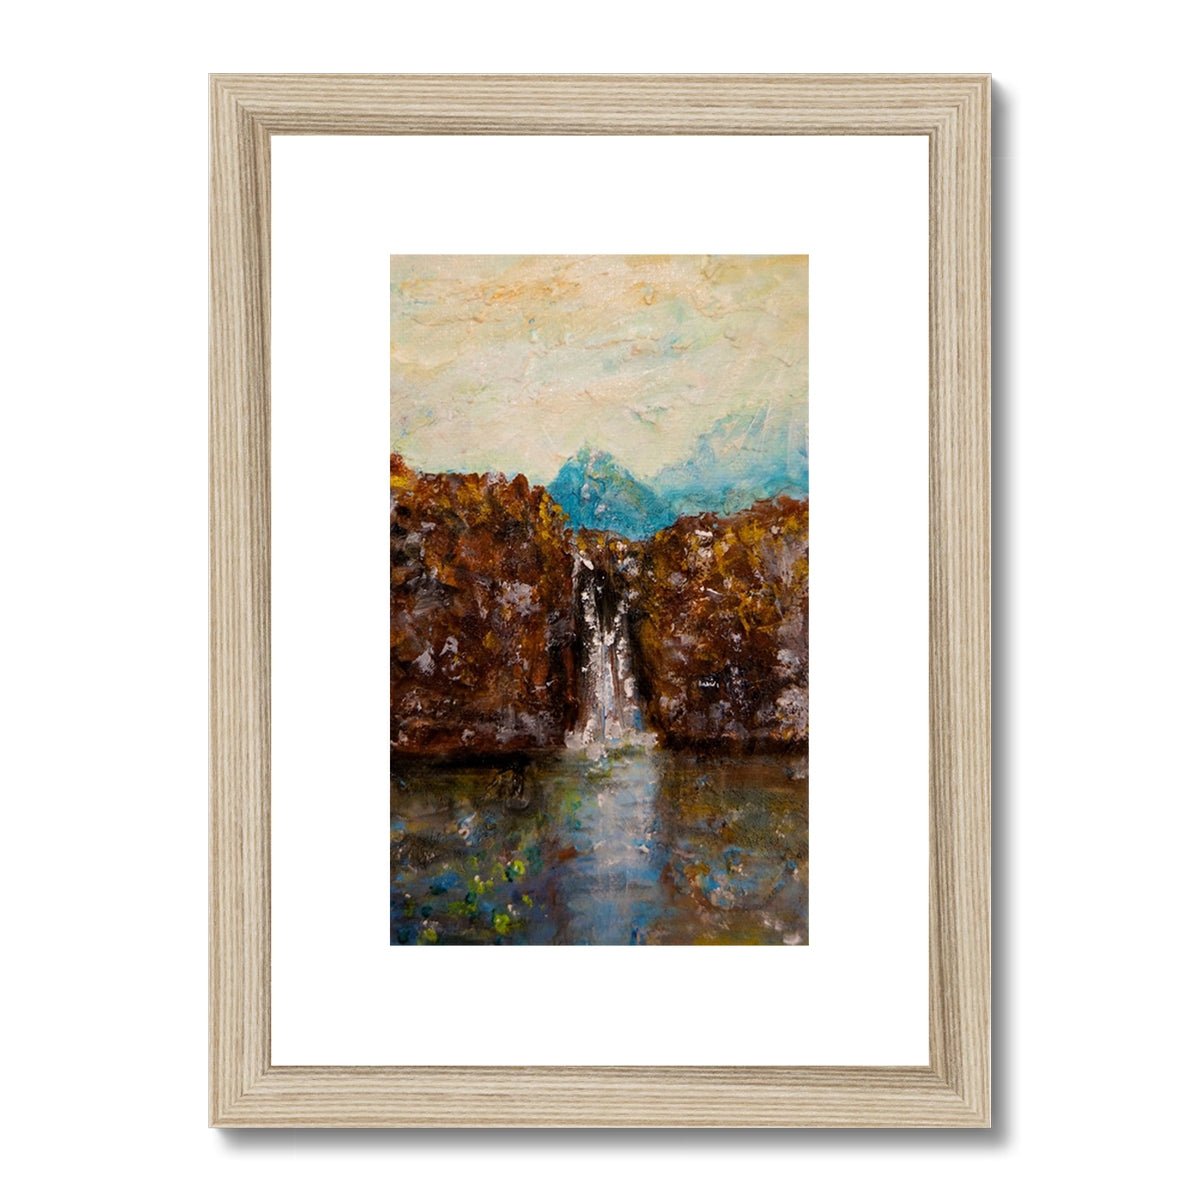 Skye Fairy Pools Painting | Framed & Mounted Prints From Scotland-Framed & Mounted Prints-Skye Art Gallery-A4 Portrait-Natural Frame-Paintings, Prints, Homeware, Art Gifts From Scotland By Scottish Artist Kevin Hunter